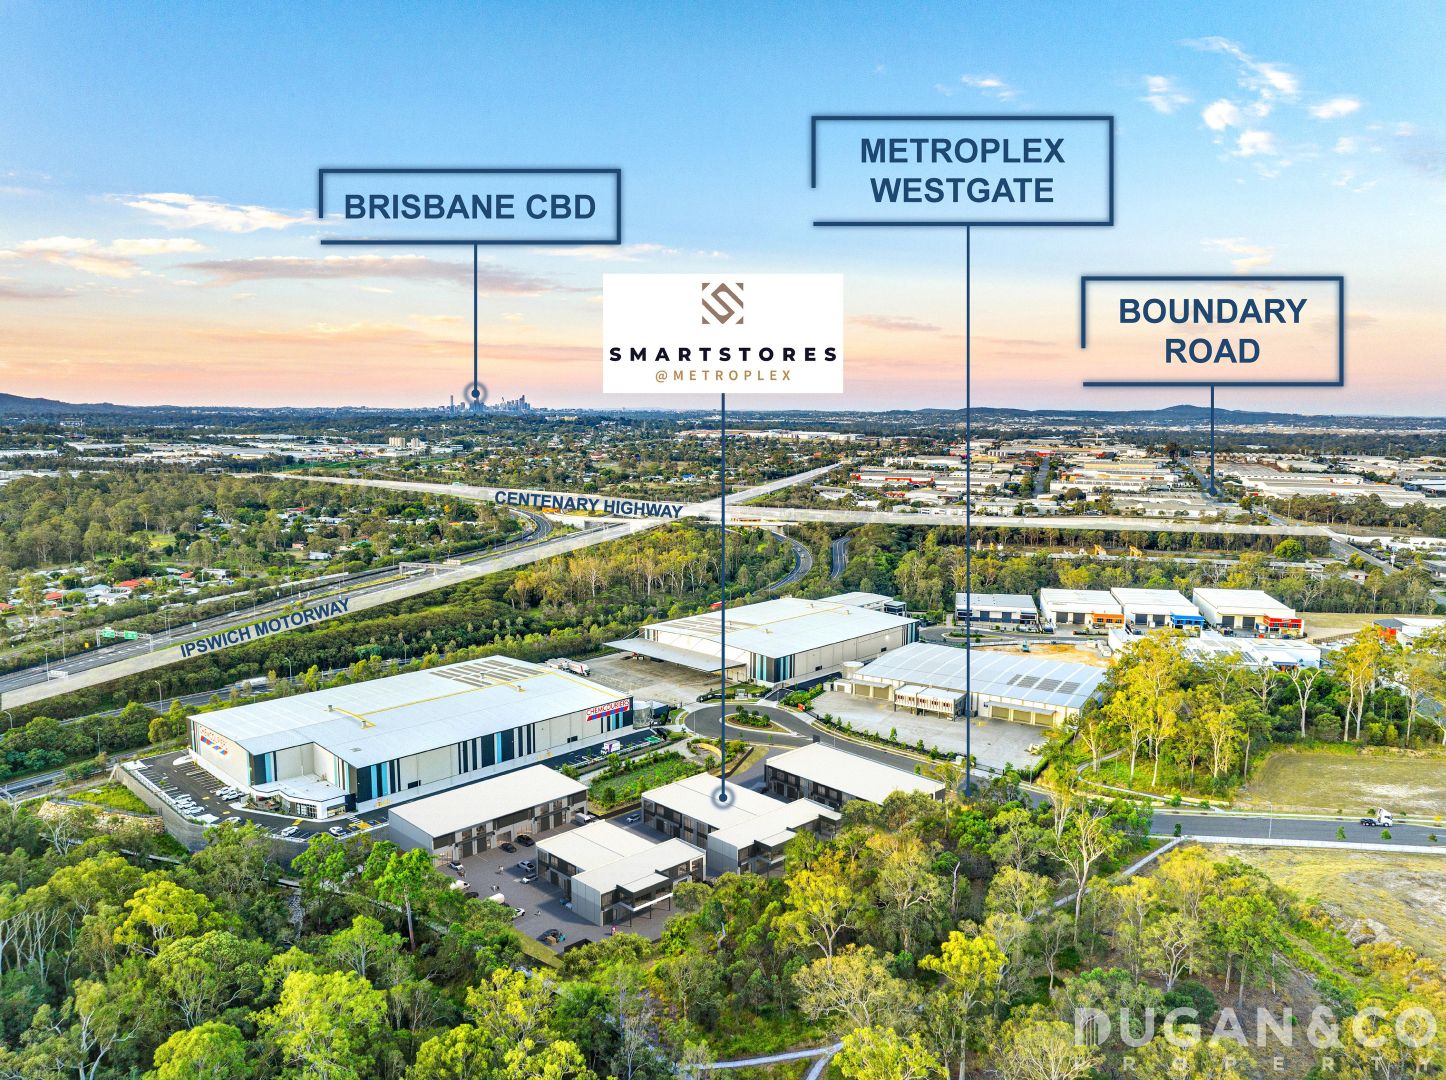 https://rimh2.domainstatic.com.au/rvupCF42Xs7ycclL_-GeY983RYA=/fit-in/1920x1080/filters:format(jpeg):quality(80):no_upscale()/https://bucket-api.commercialrealestate.com.au/v1/bucket/image/2018732388_1_1_230829_123807-w3832-h2862